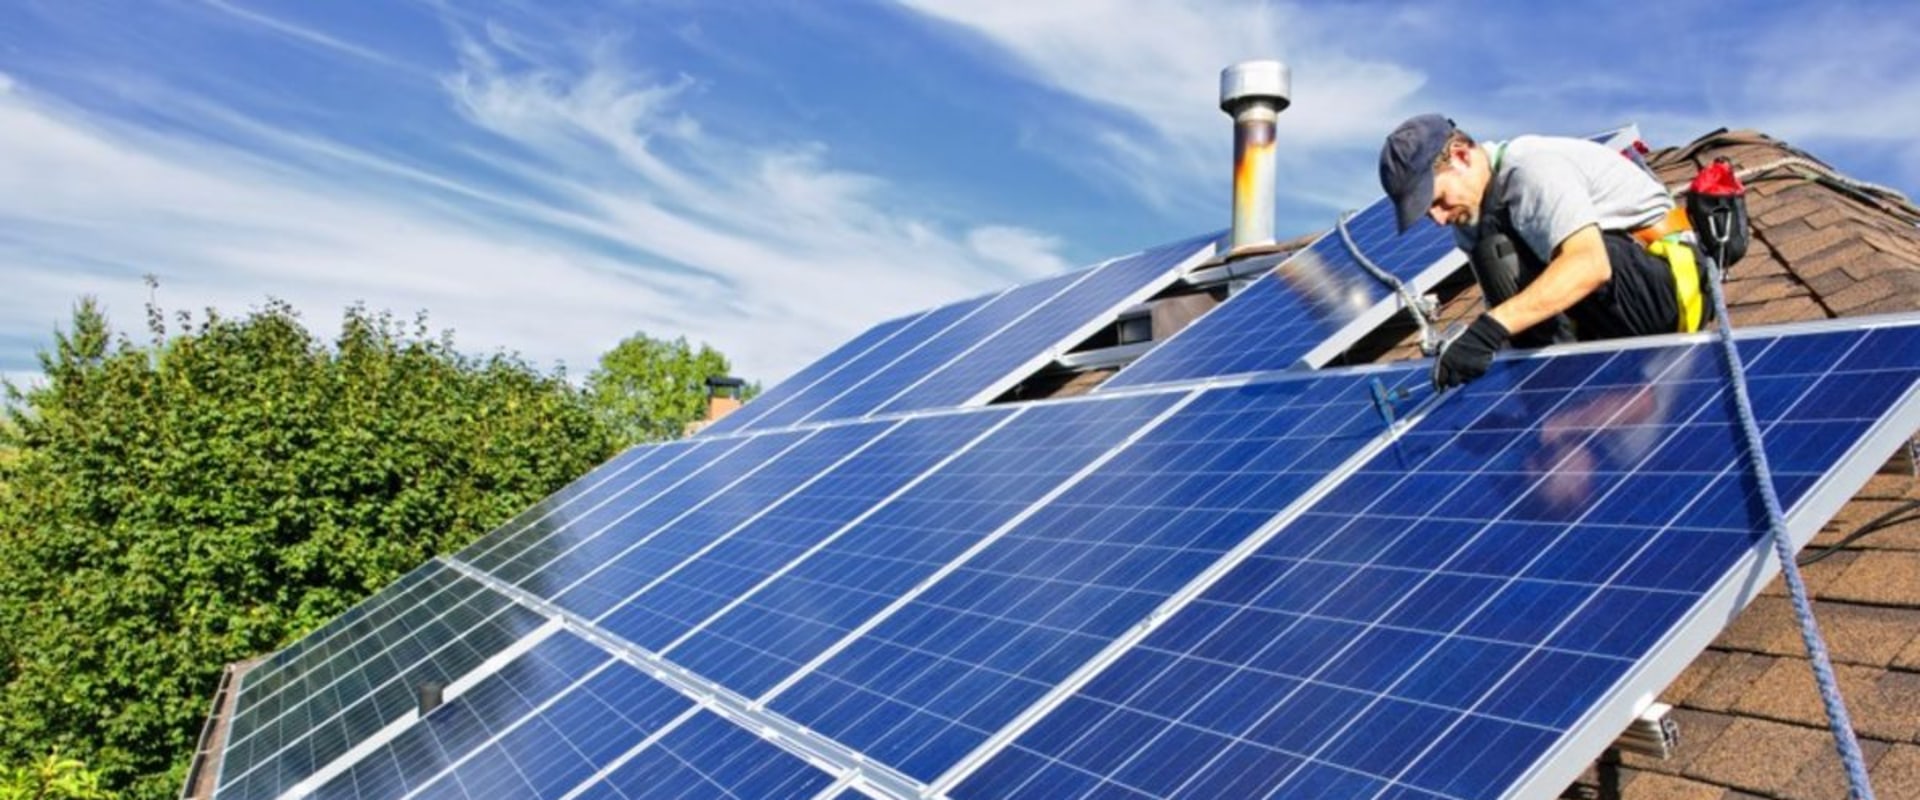 Everything You Need to Know About Solar Power Systems